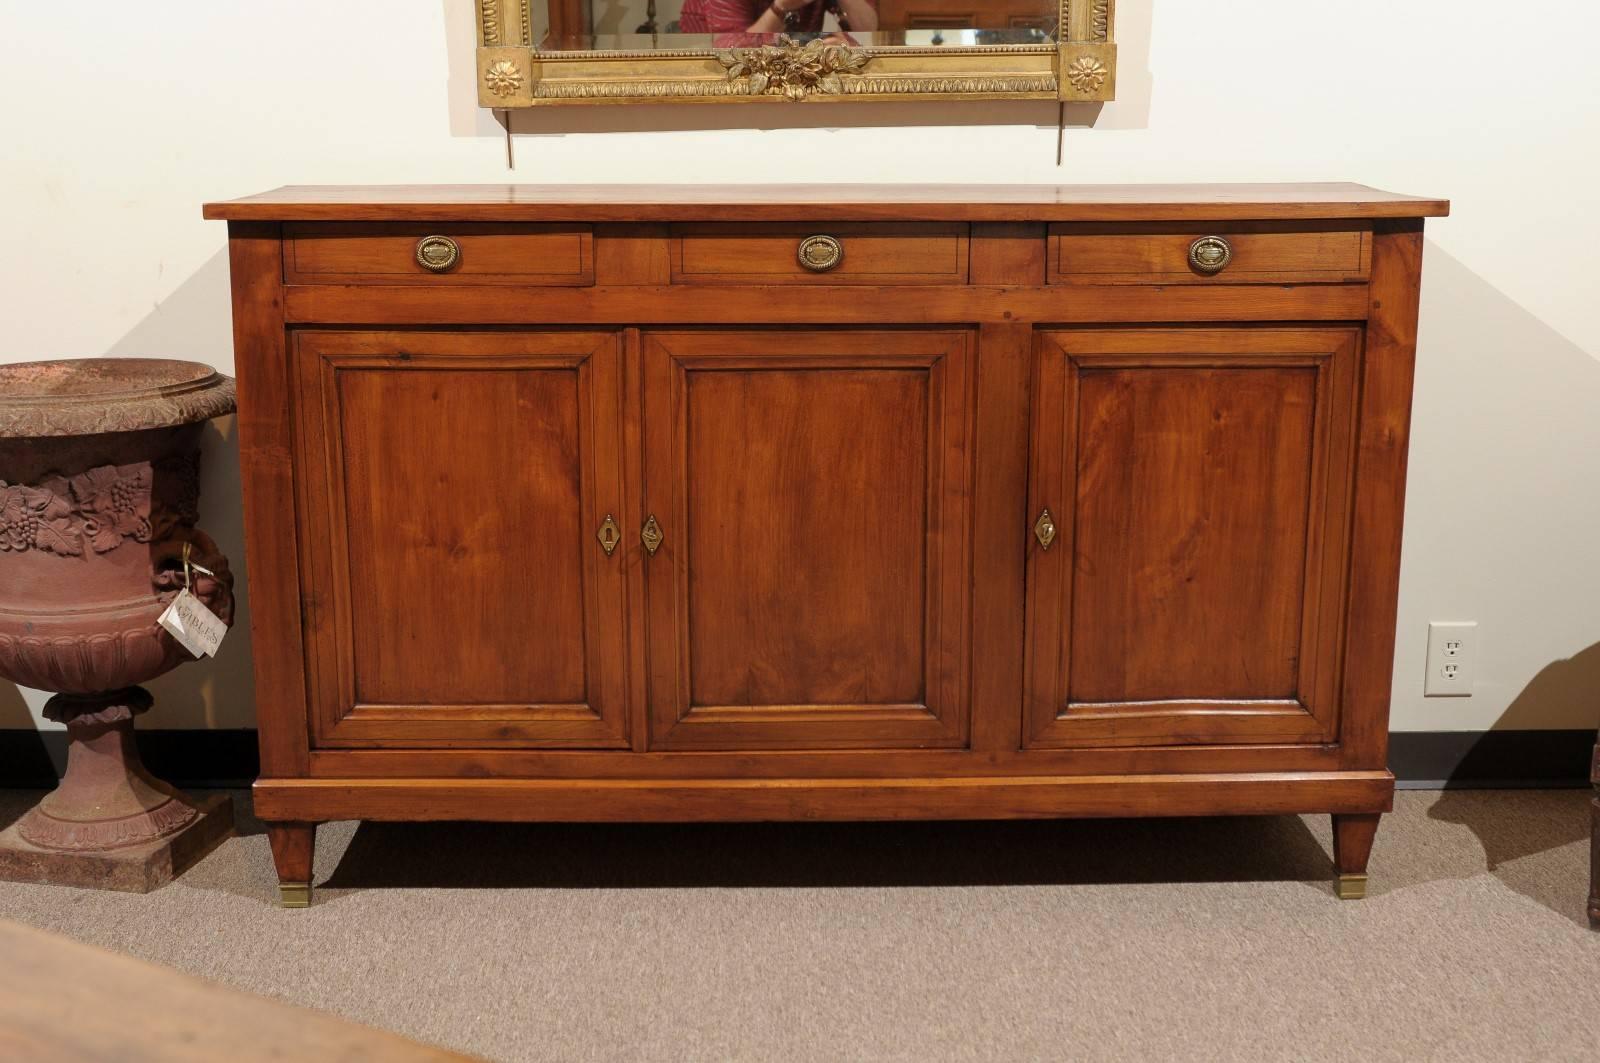 19th century cherry Directoire style enfilade, circa 1860
A very handsome enfilade in rich dark cherry with straight lines. The simple paneled doors and drawers are outlined with a thin black line.
 